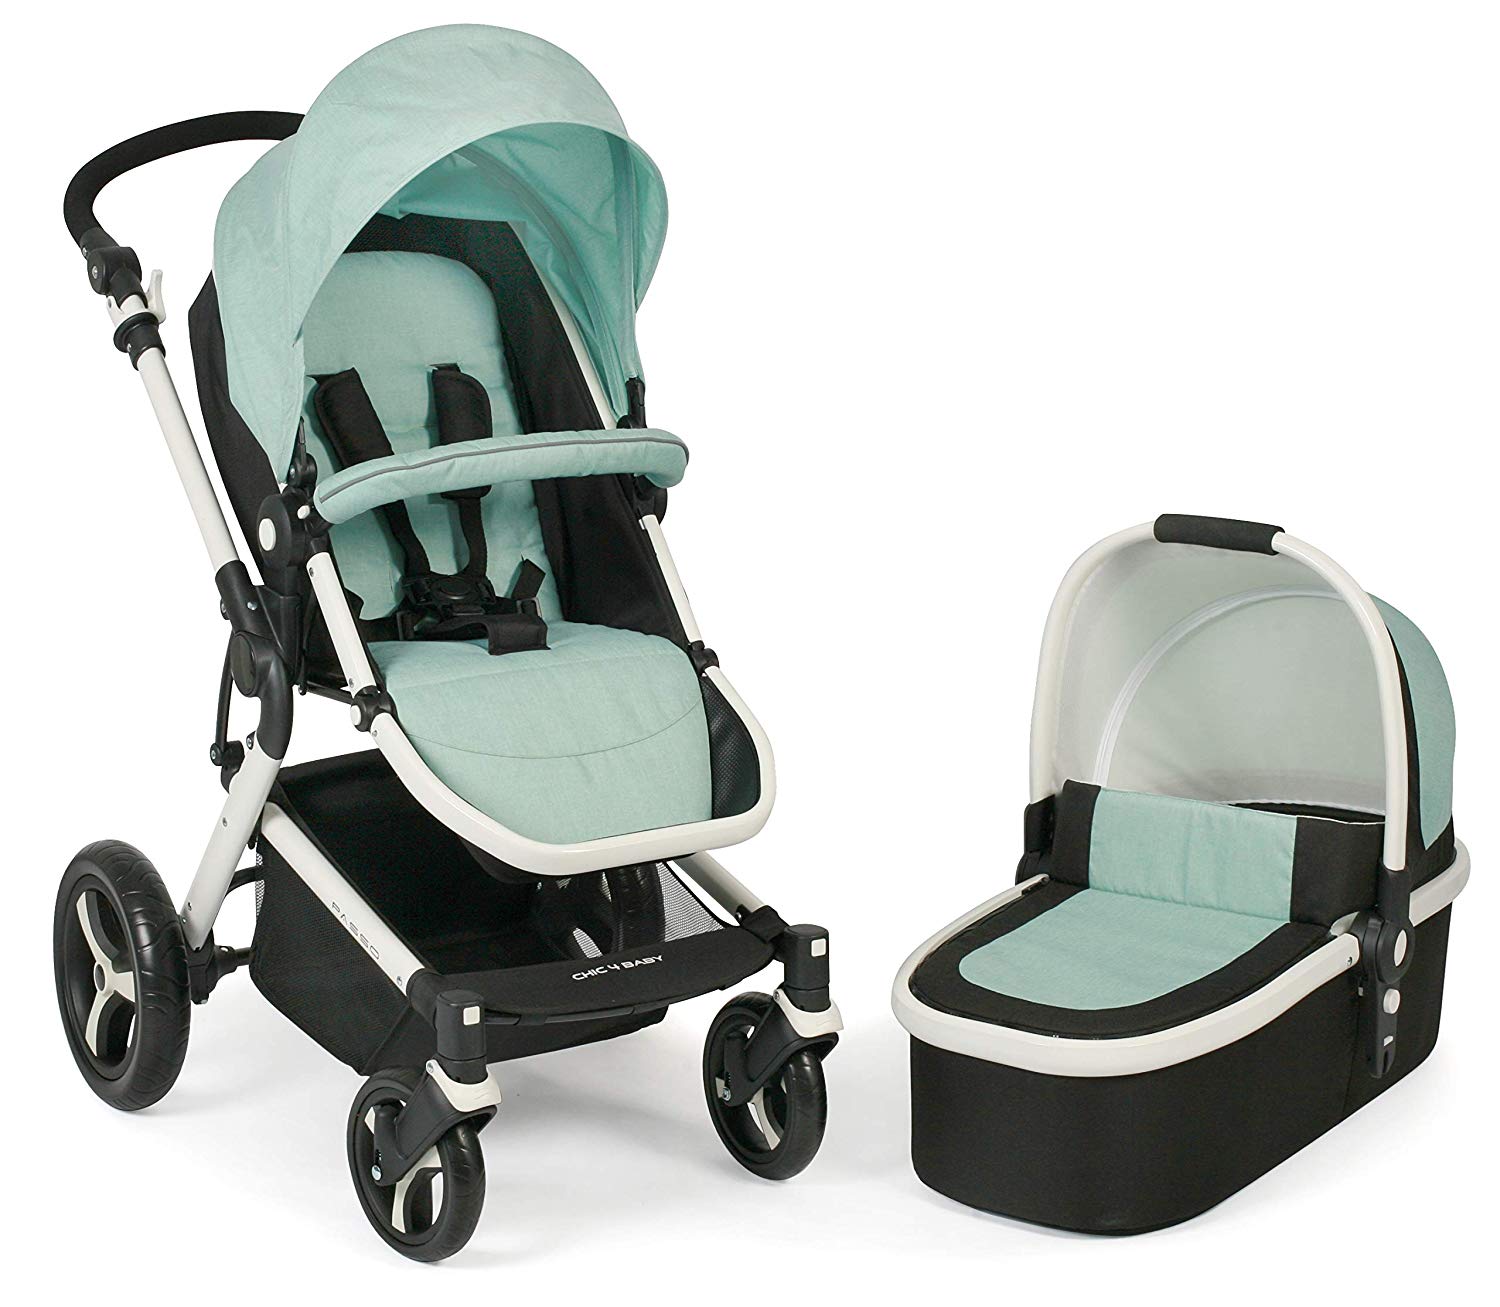 CHIC 4 BABY 163 66 Passo Combination Pushchair Including Baby Bath, Sports Seat and Maxi-Cosi Adapter, Mint Green